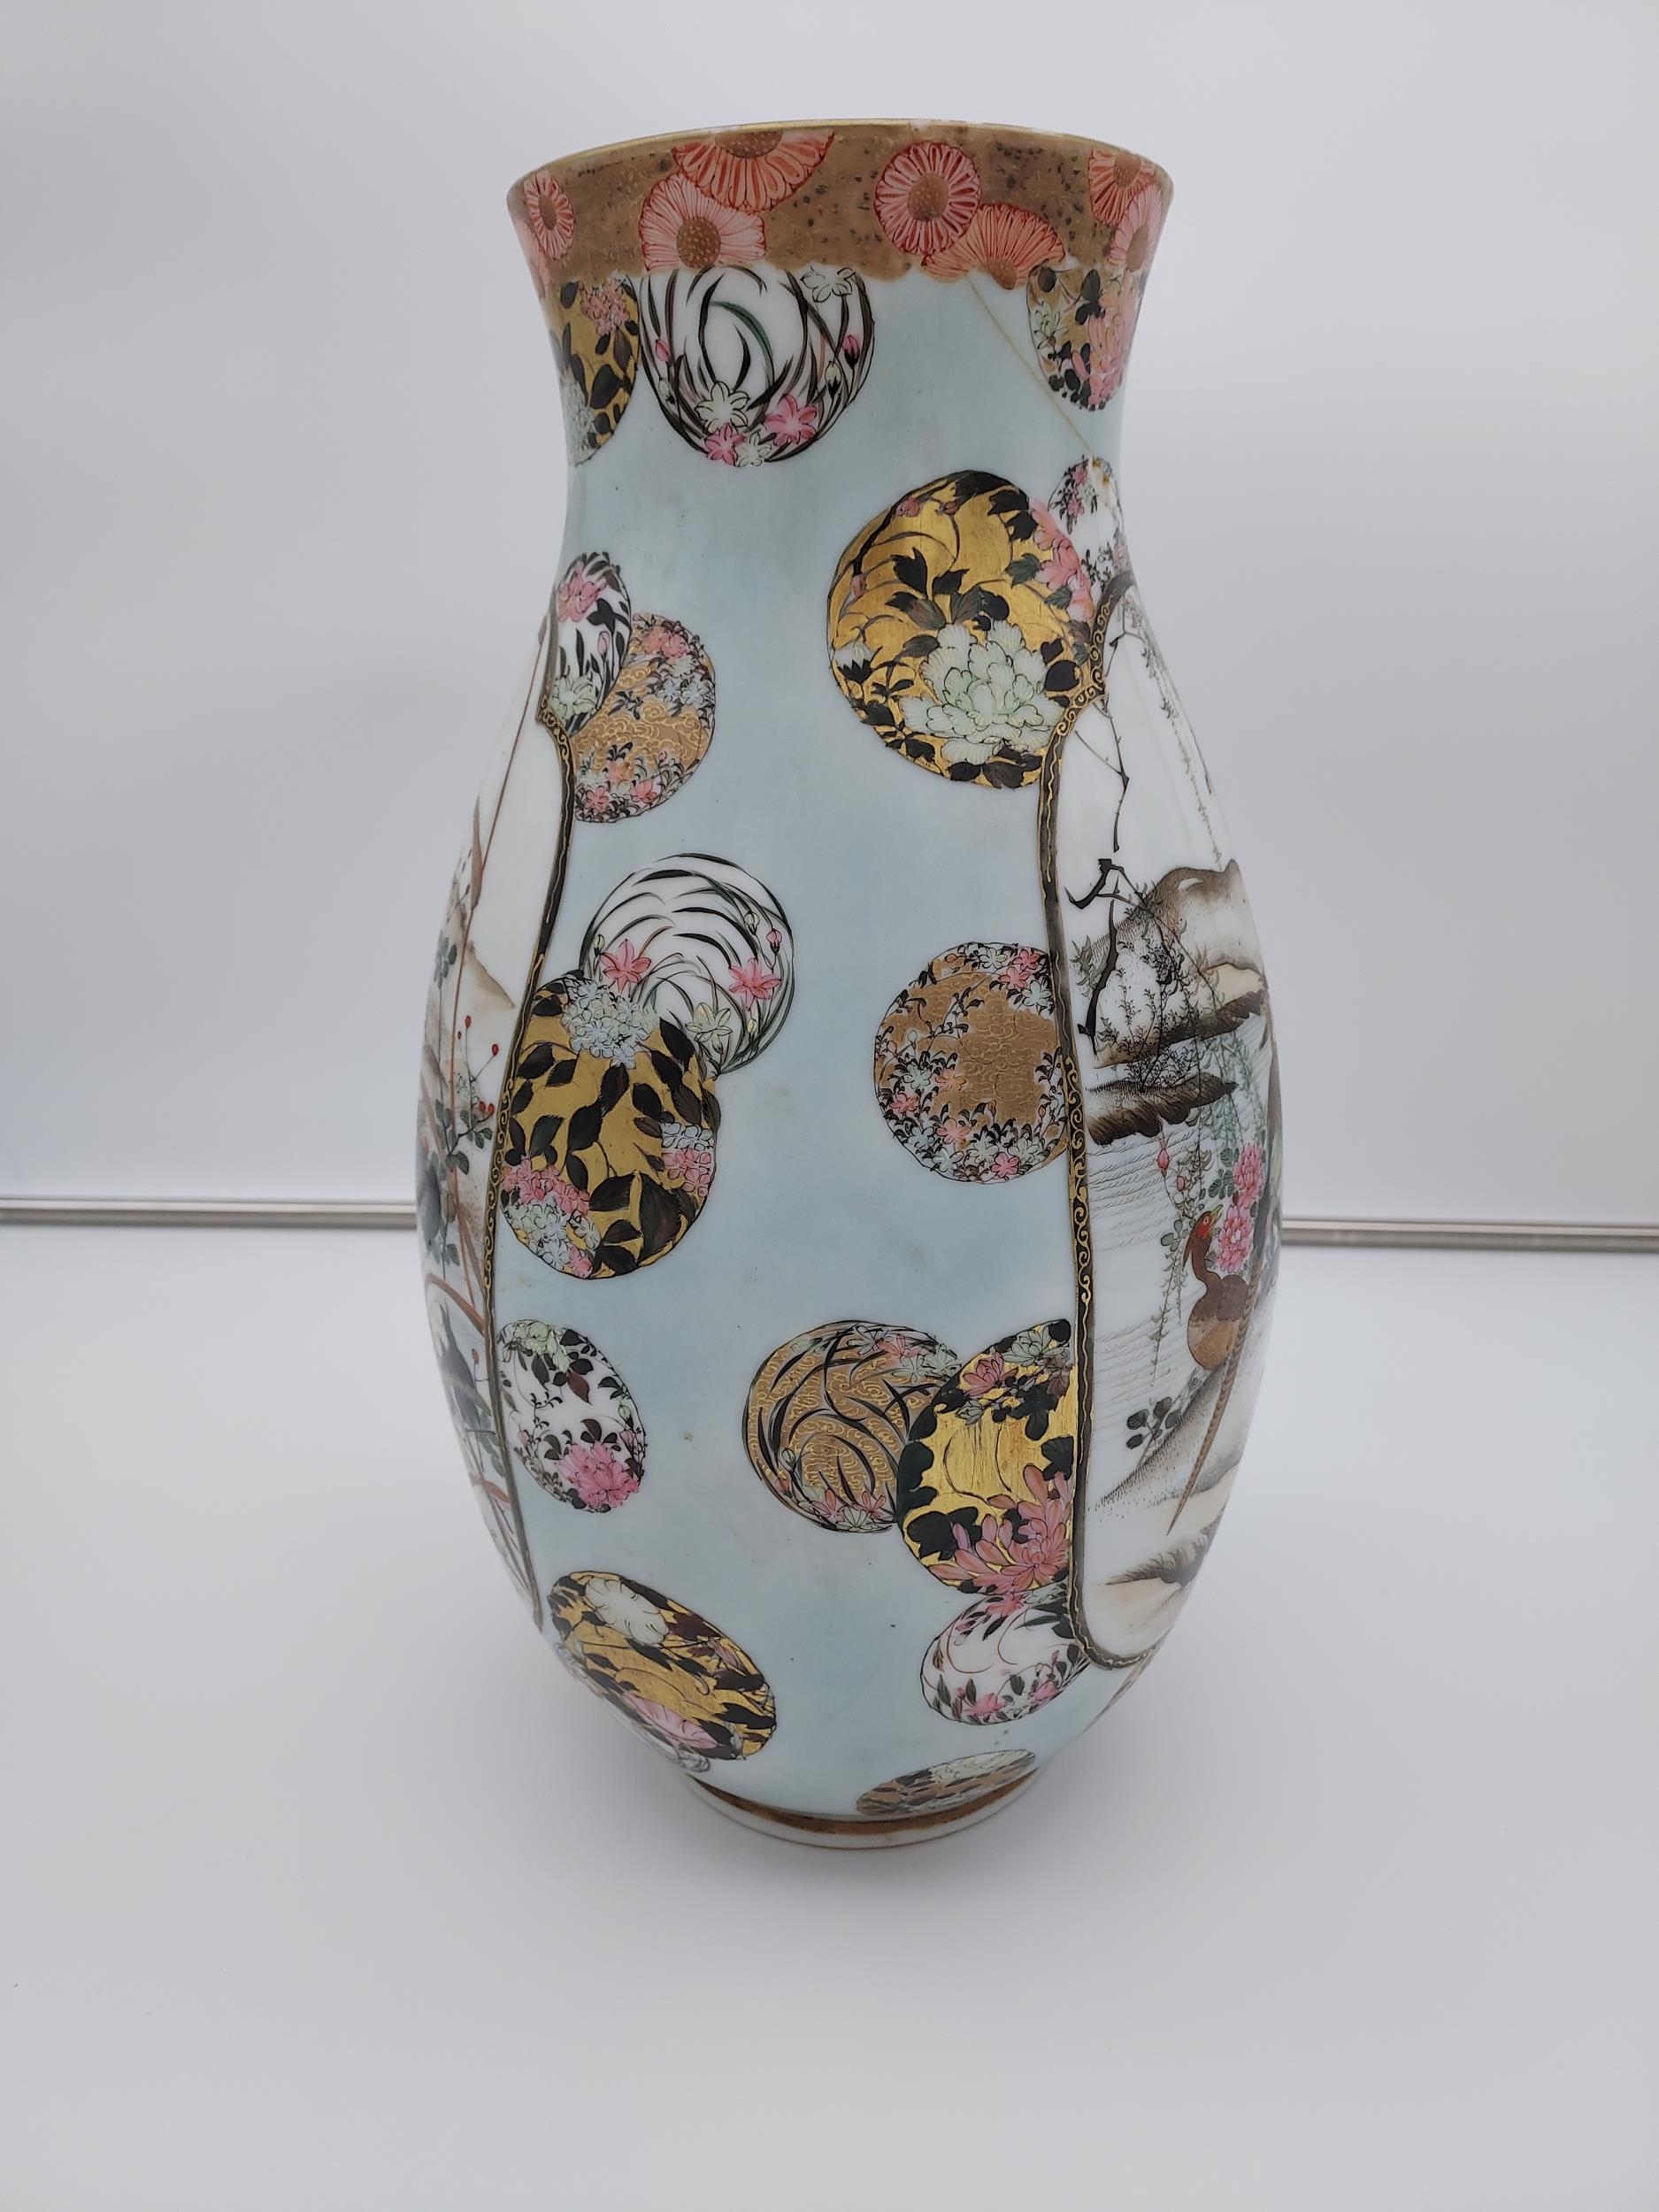 A Large Japanese hand painted panel vase, depicting various birds, flowers and village - Image 3 of 12